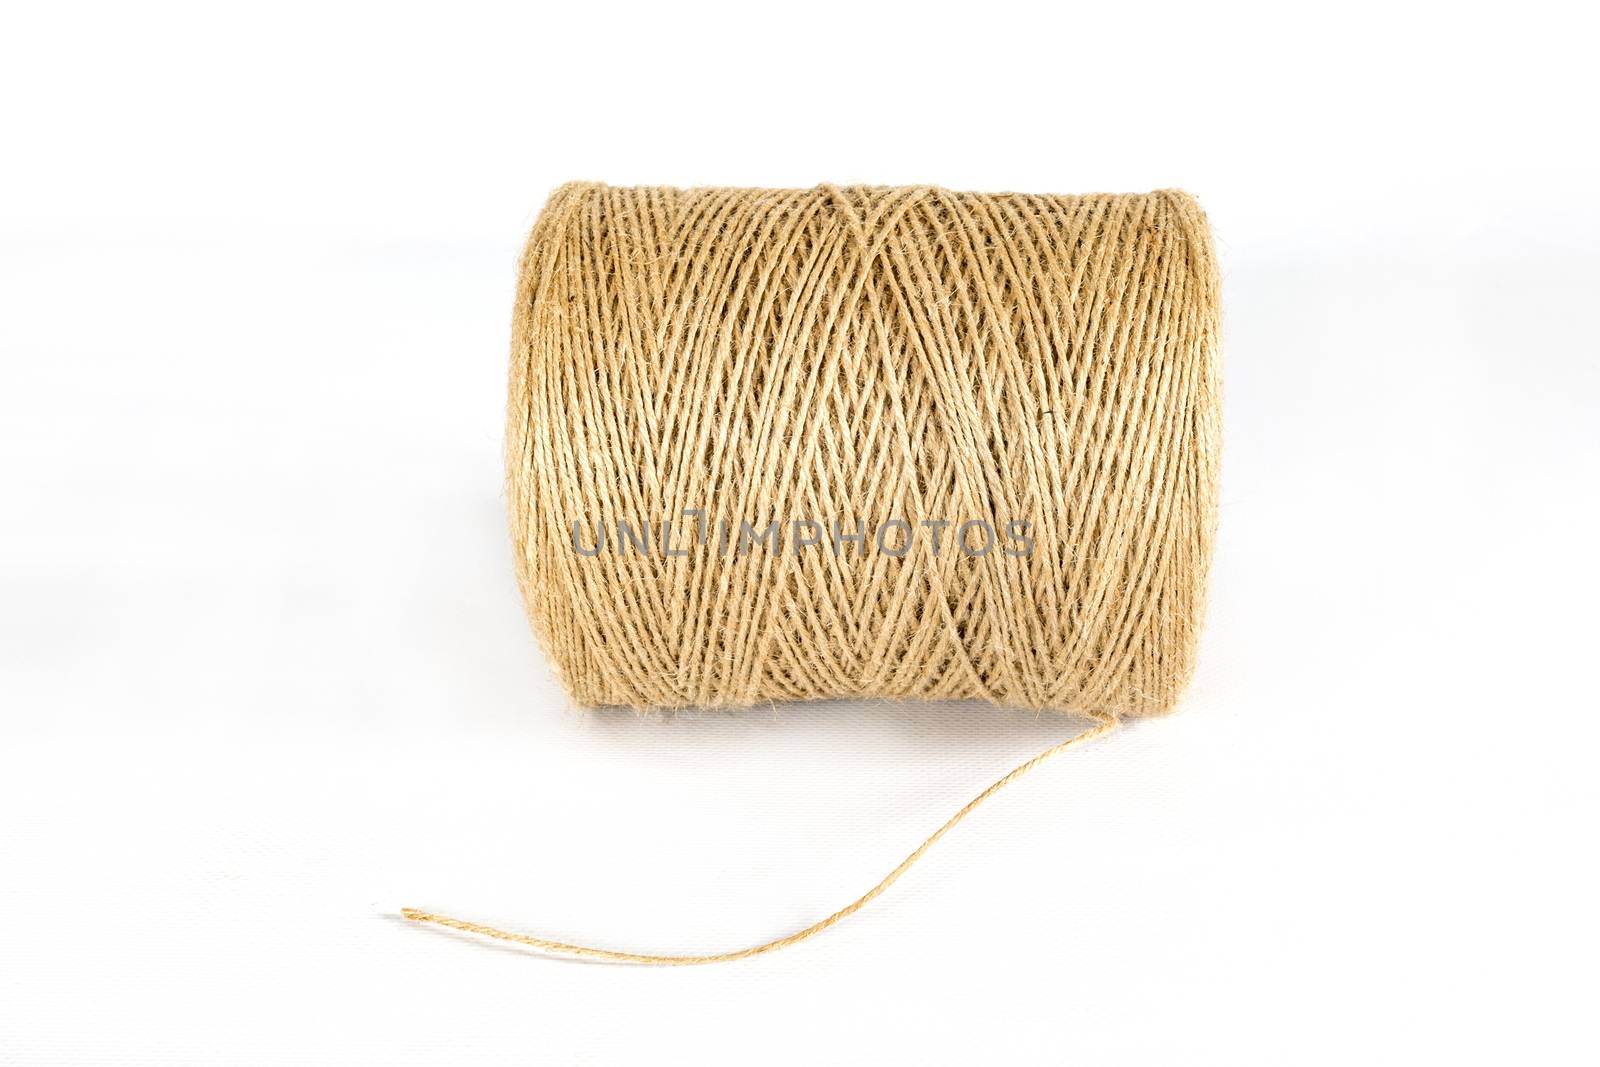 Hank of a hemp rope bobbin. Close-up isolated on a white background.